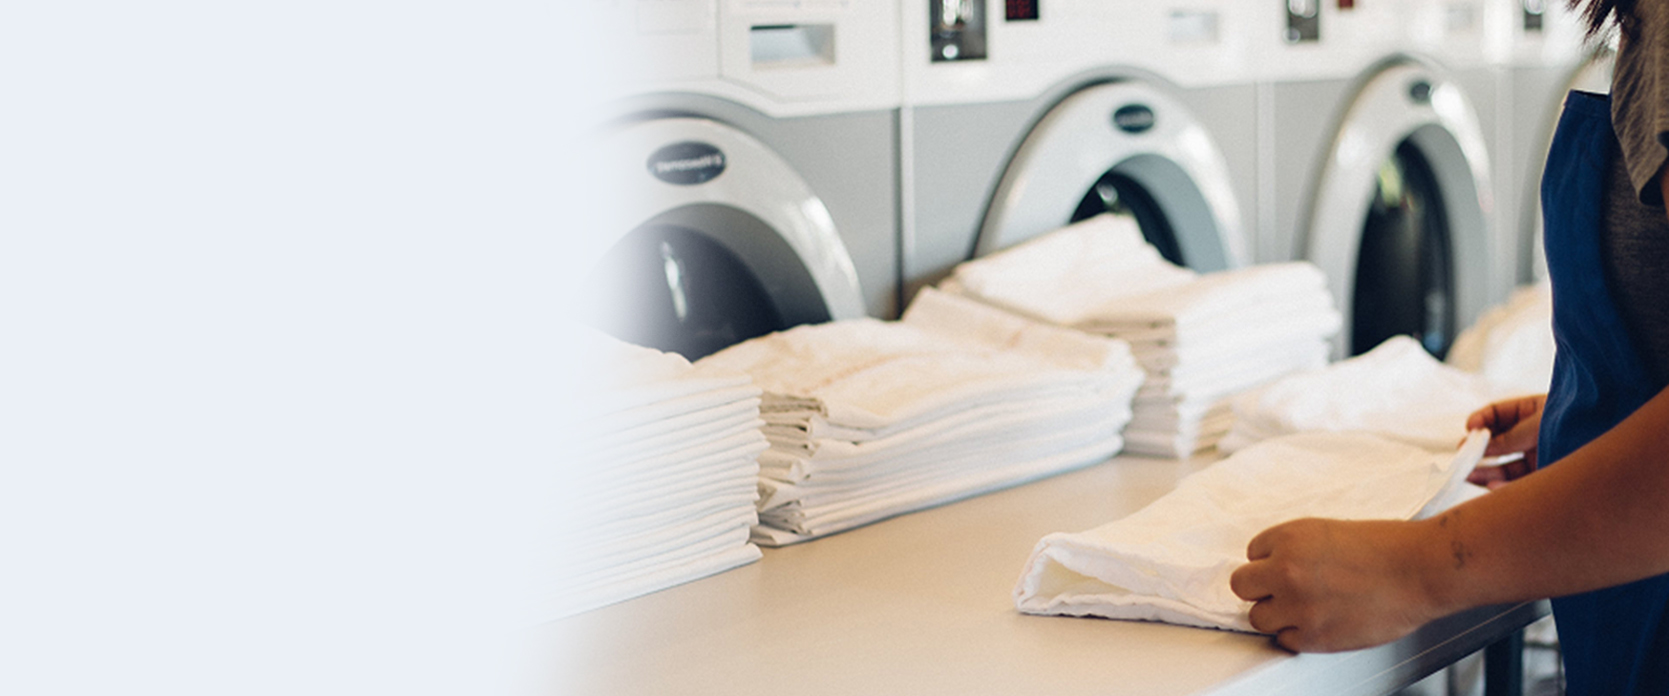 Commercial Laundry Software